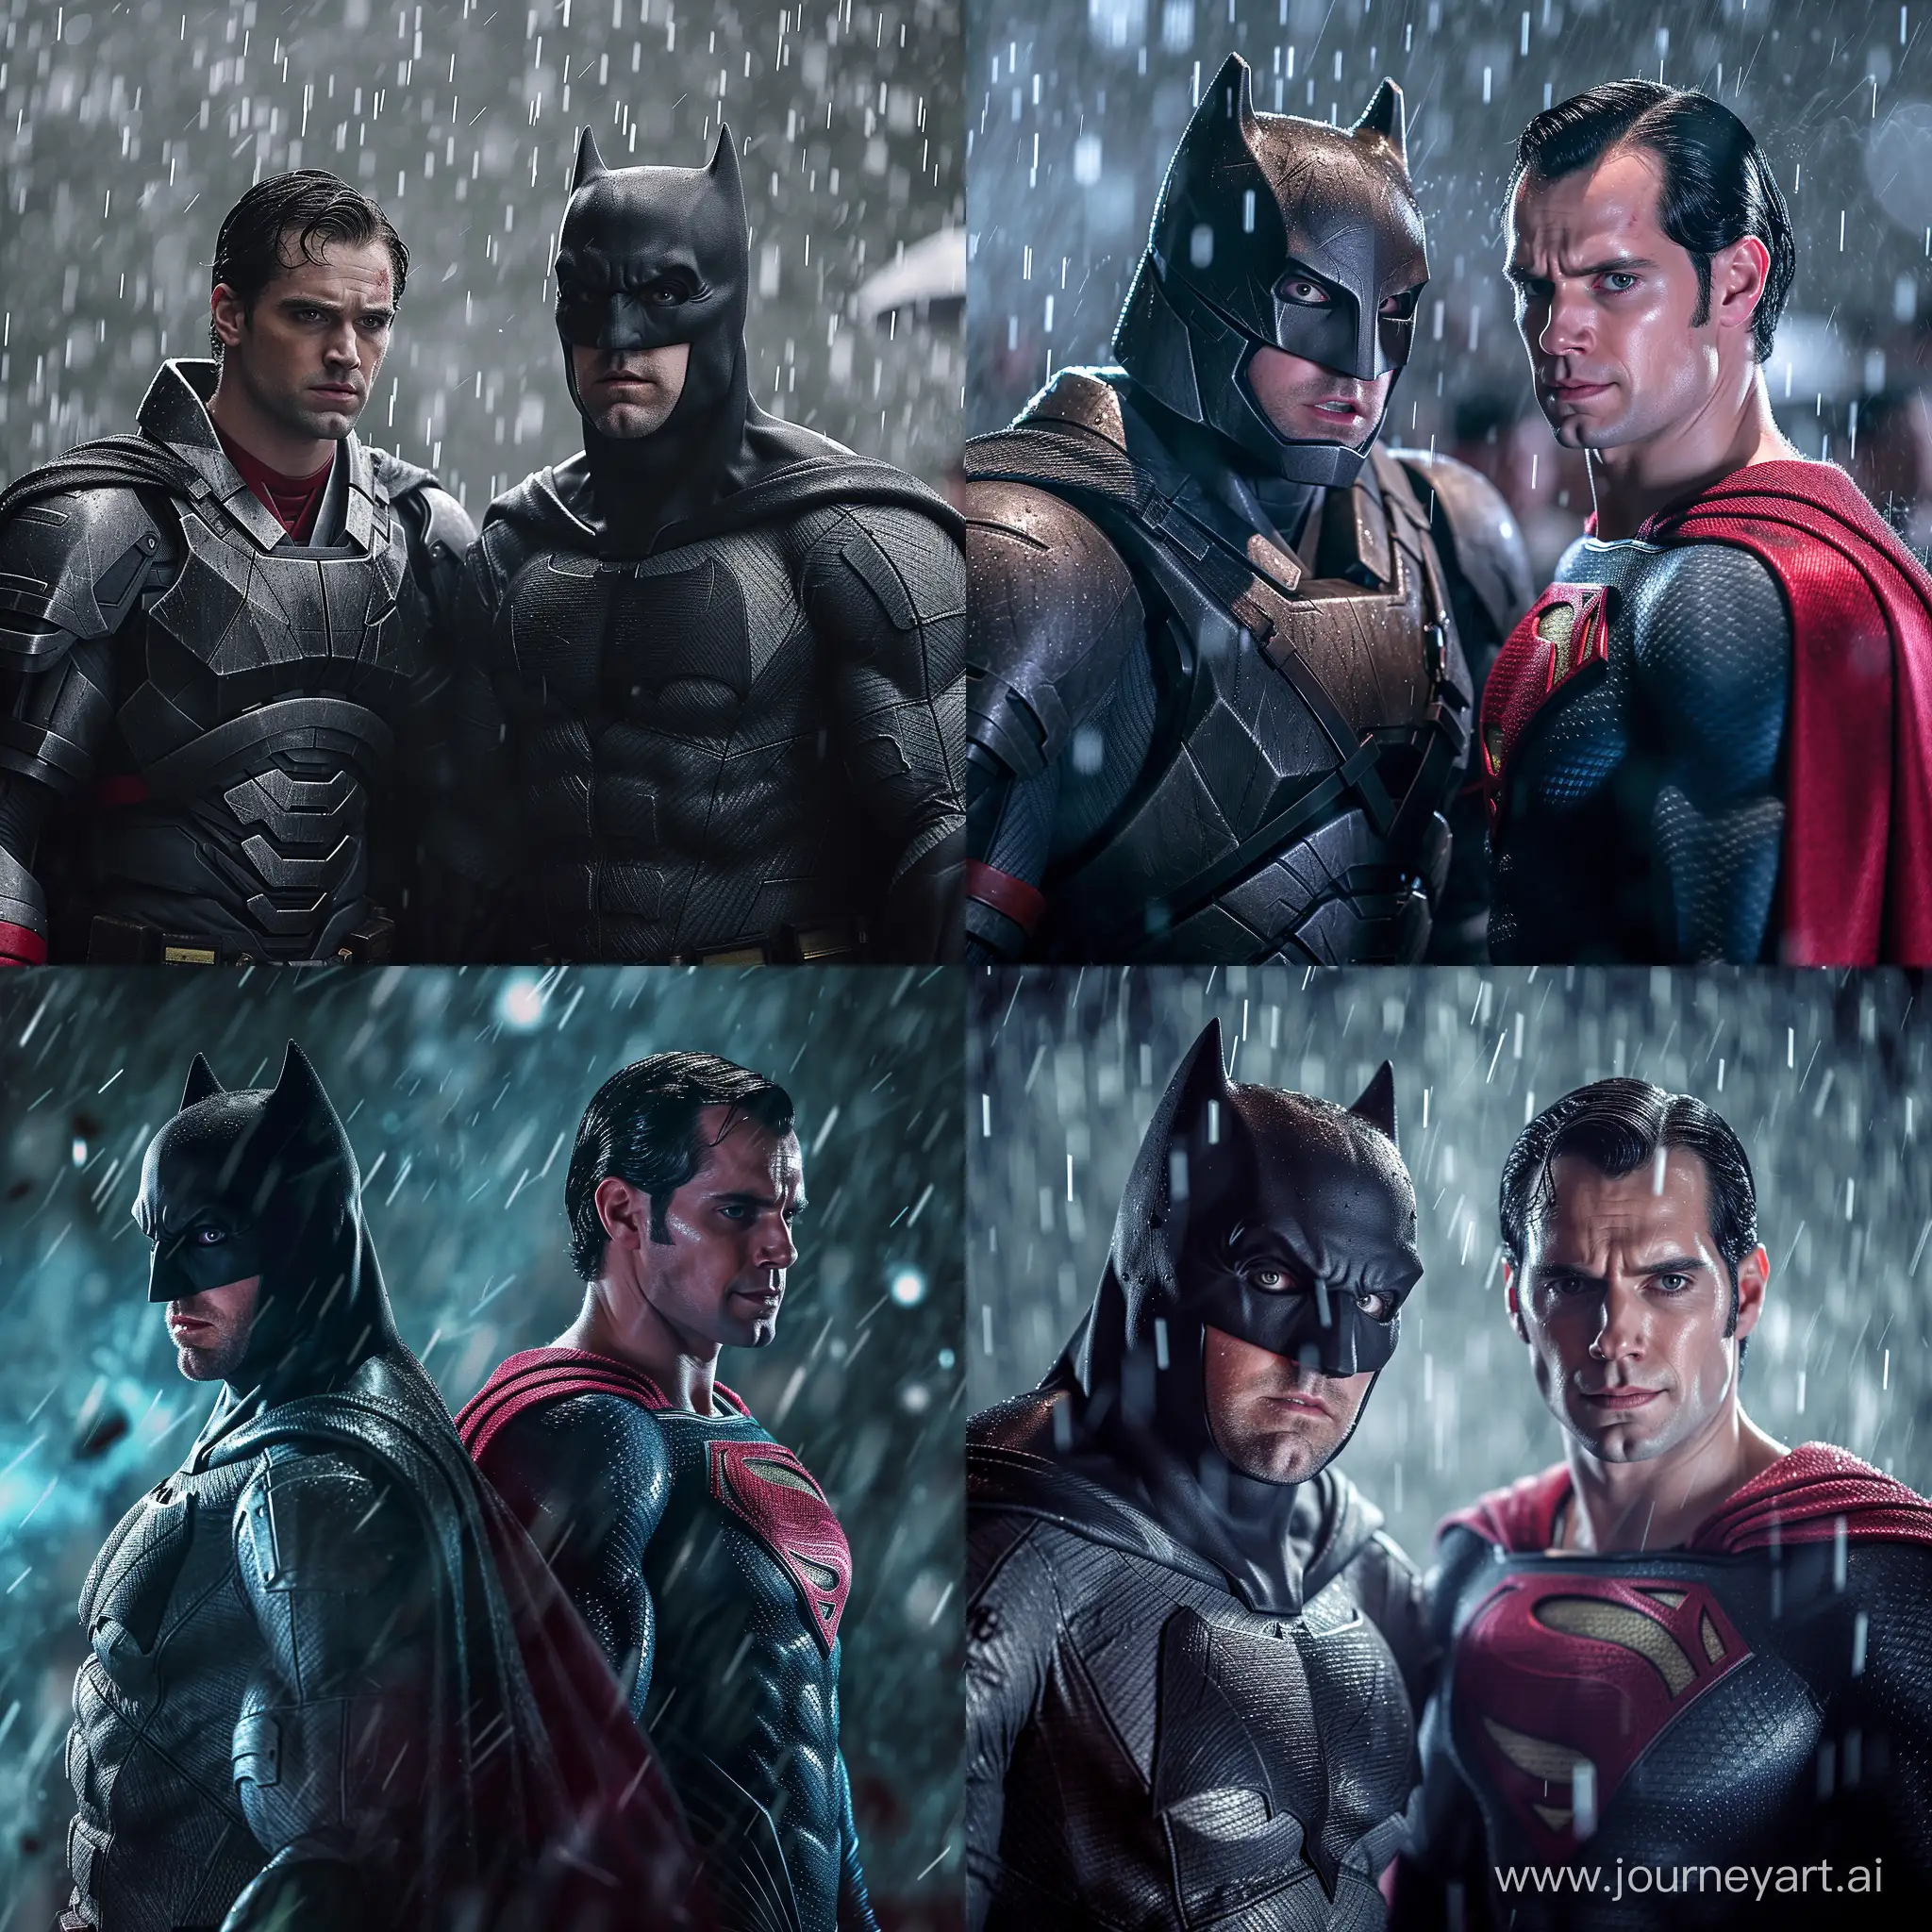 hyper realistic the batman Robert Pattinson and Henry Cavill wearing super man suit , realistic in the rain depth of field, dynamic